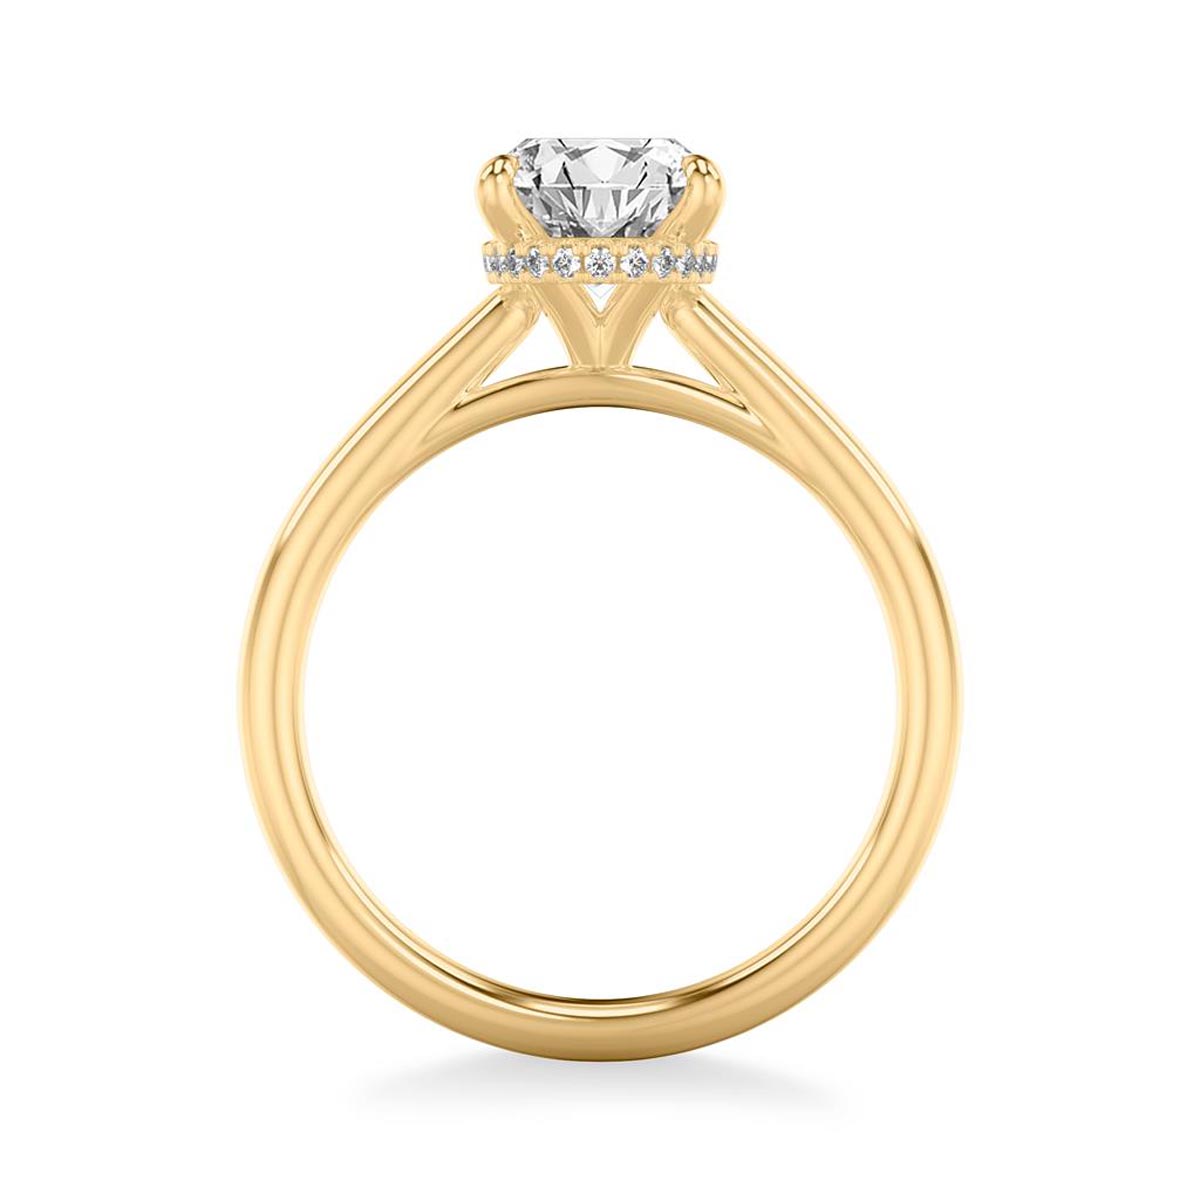 Artcarved Diamond Engagement Ring Setting in 14kt Yellow Gold (1/10ct tw)